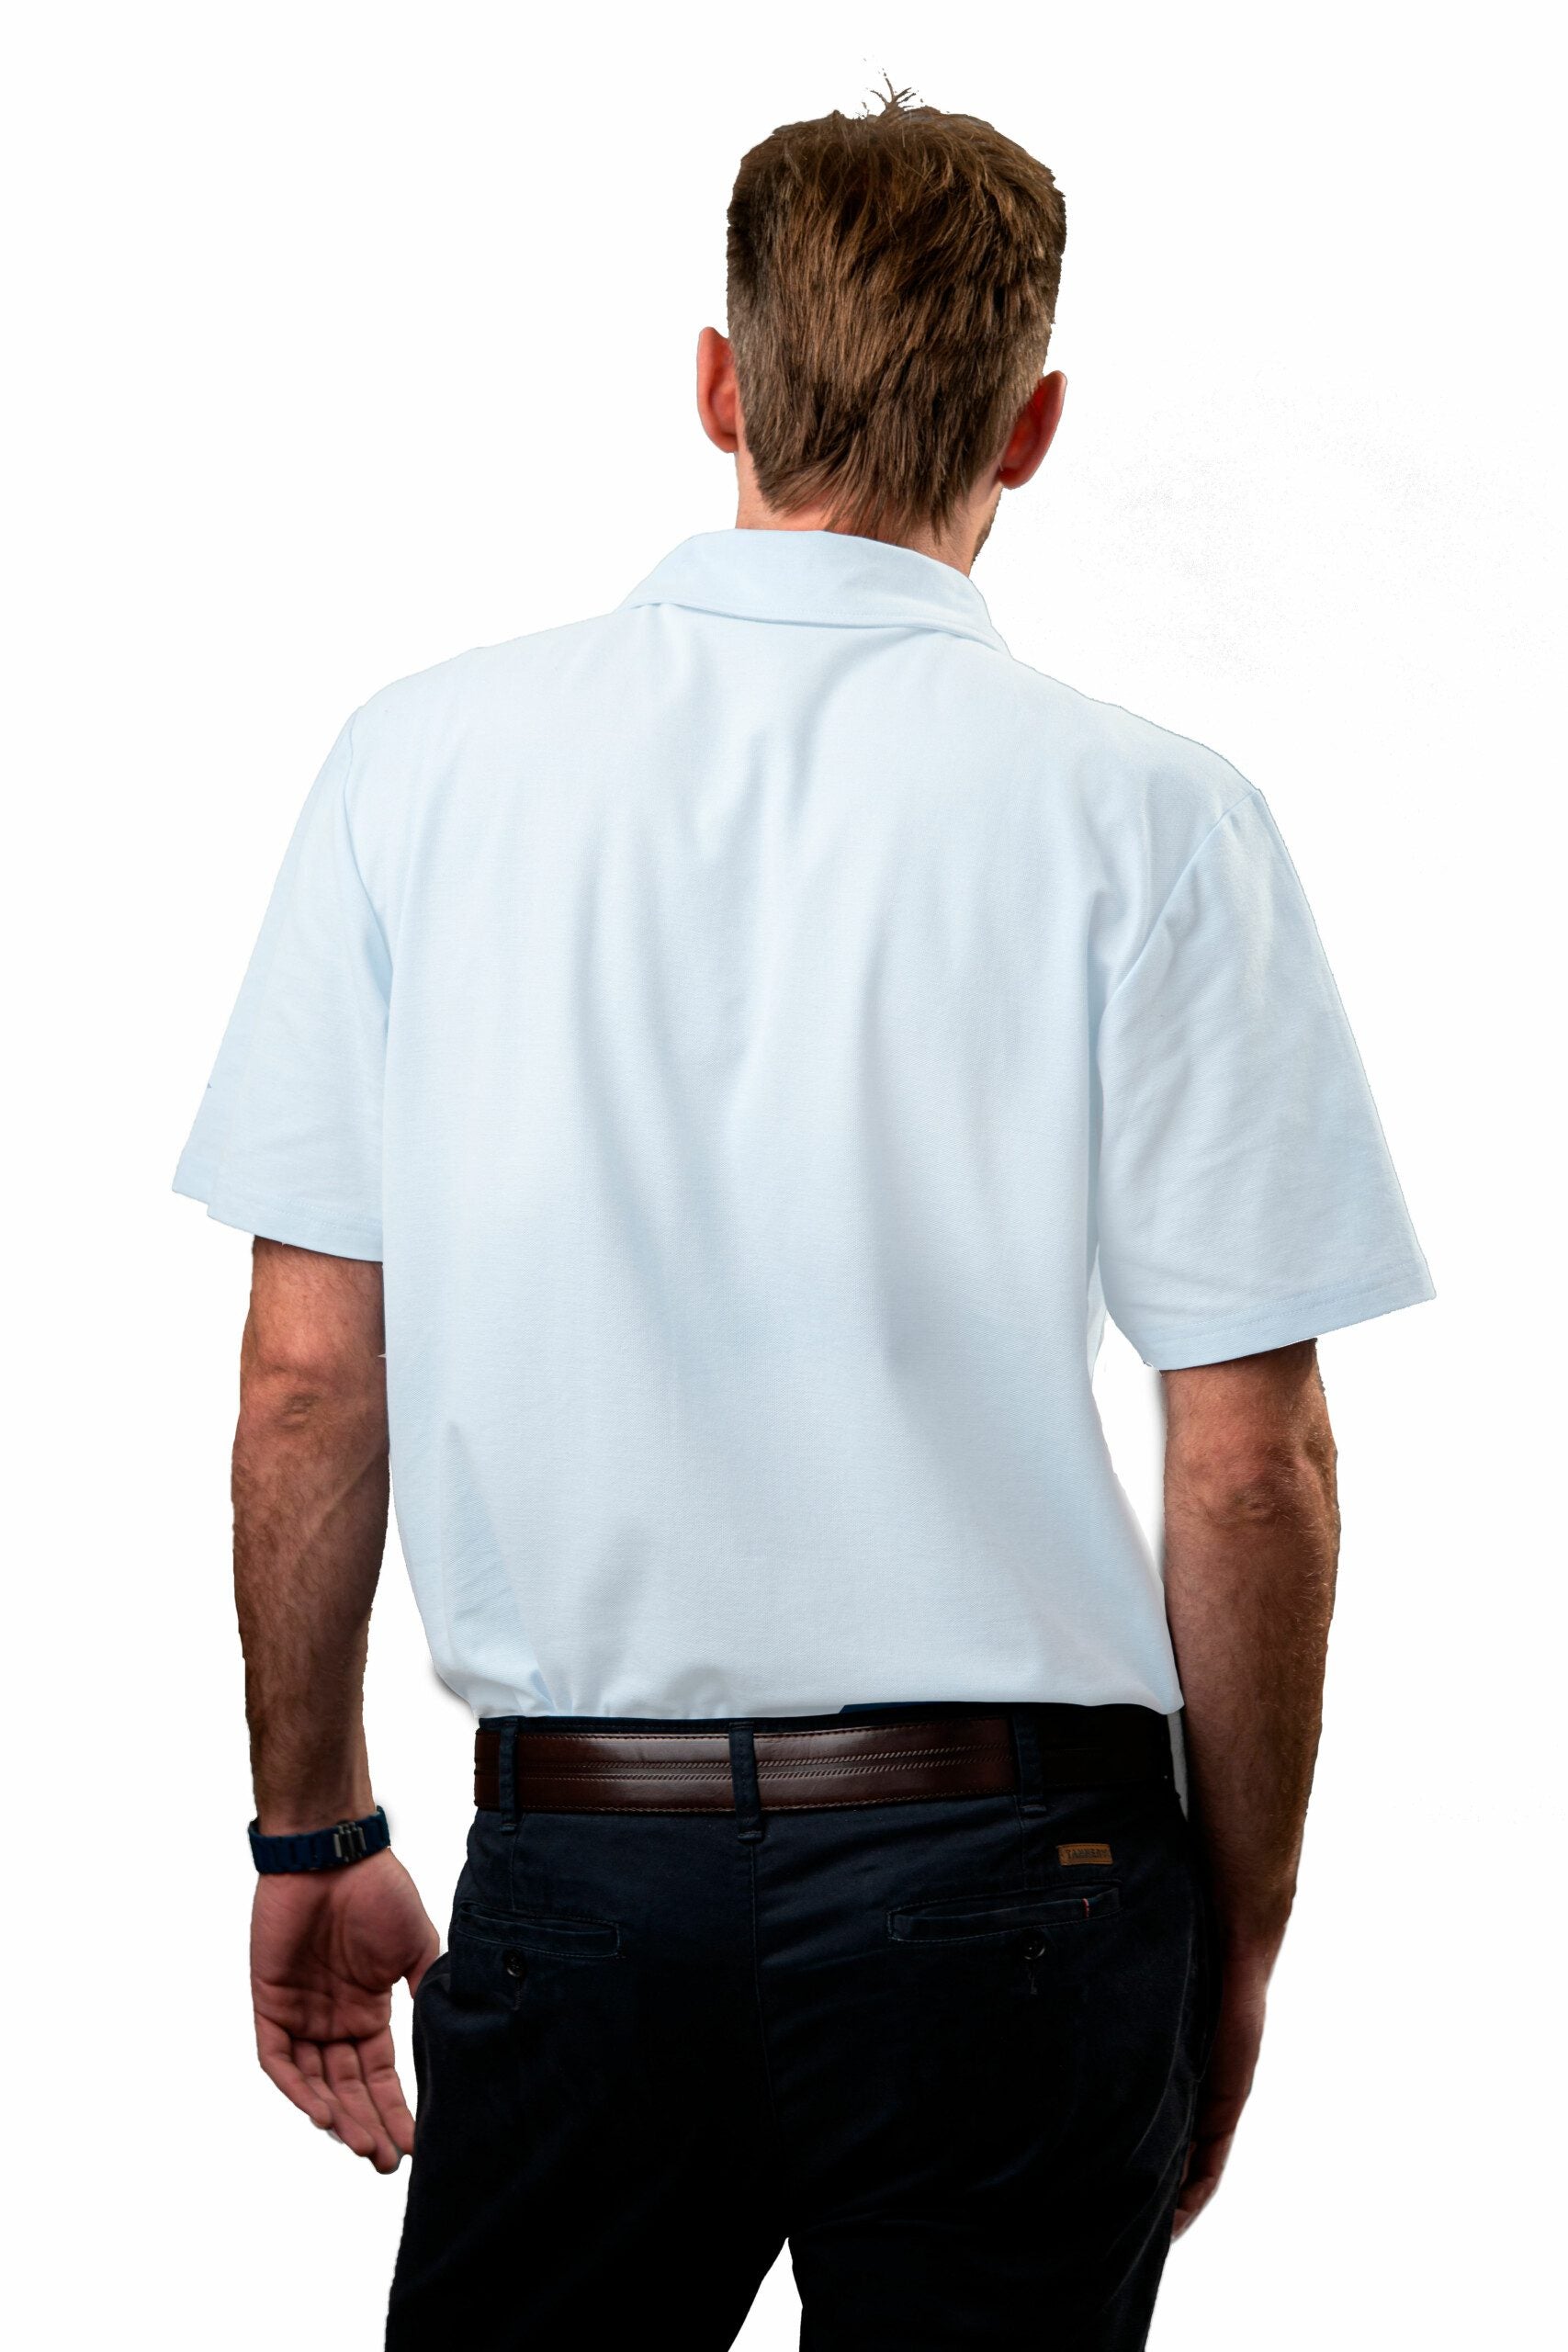 American Fit - PiquePolo-White